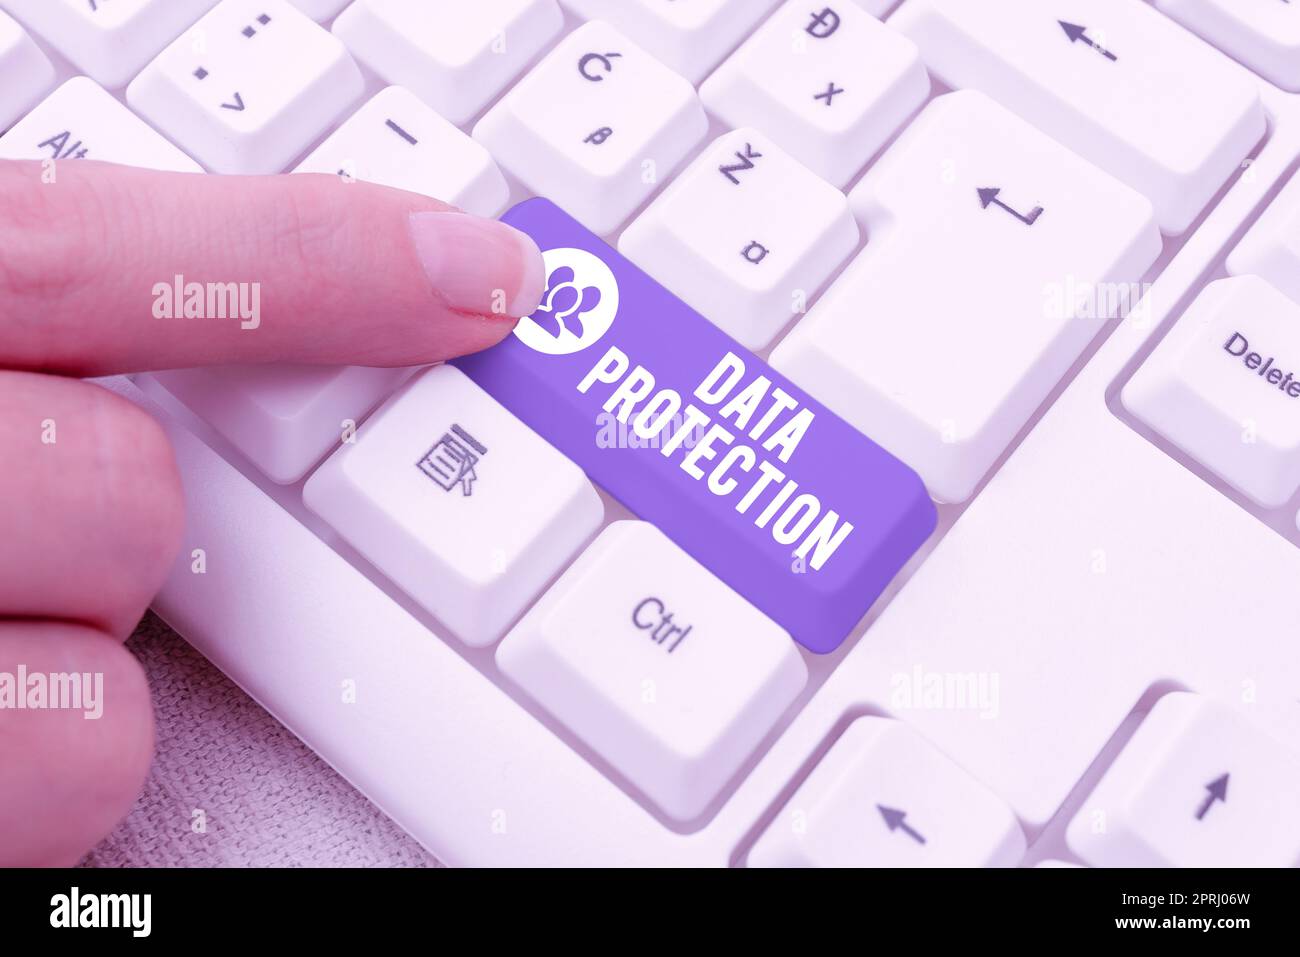 Inspiration showing sign Data ProtectionProtect IP addresses and personal data from harmful software. Business showcase Protect IP addresses and personal data from harmful software Stock Photo